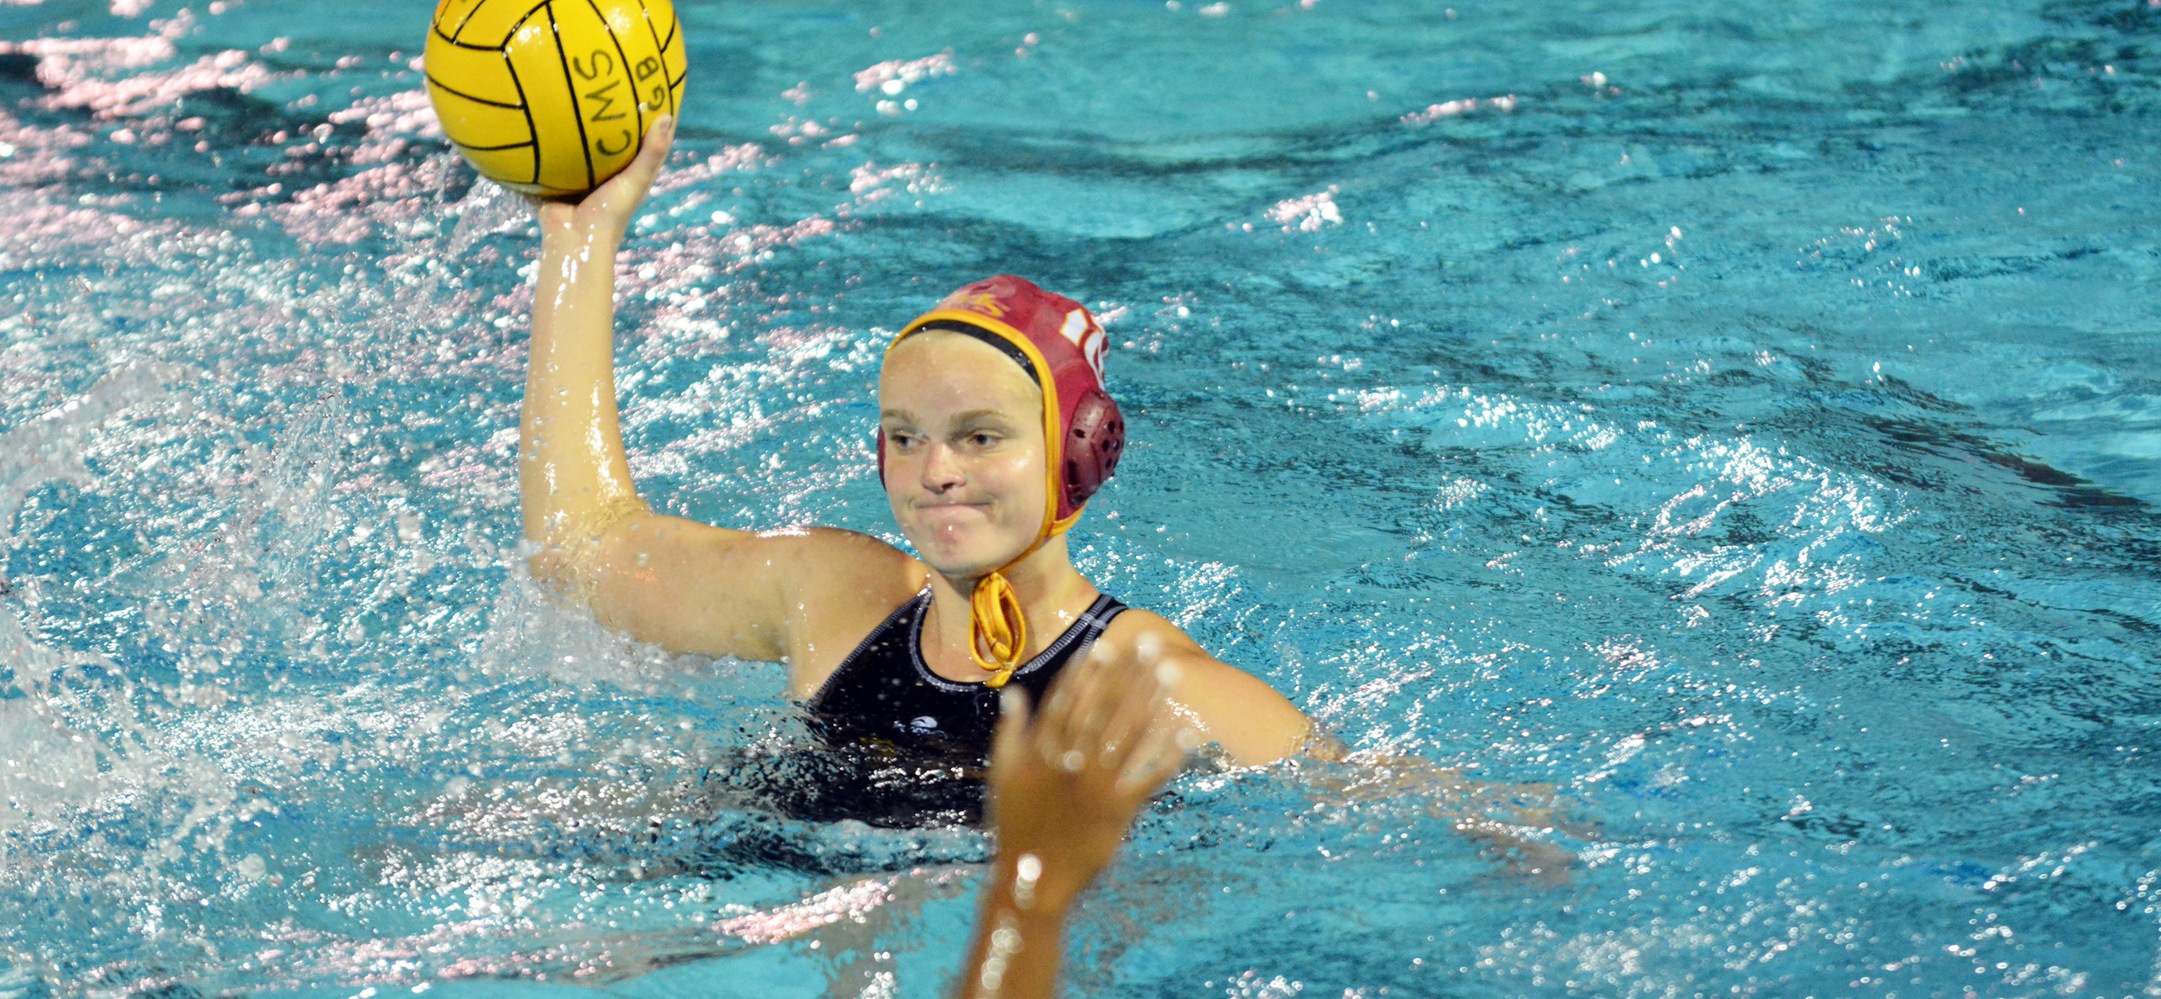 Anna Fry, Jessica Salaz Help CMS Women's Water Polo to Big Road Win over Whittier